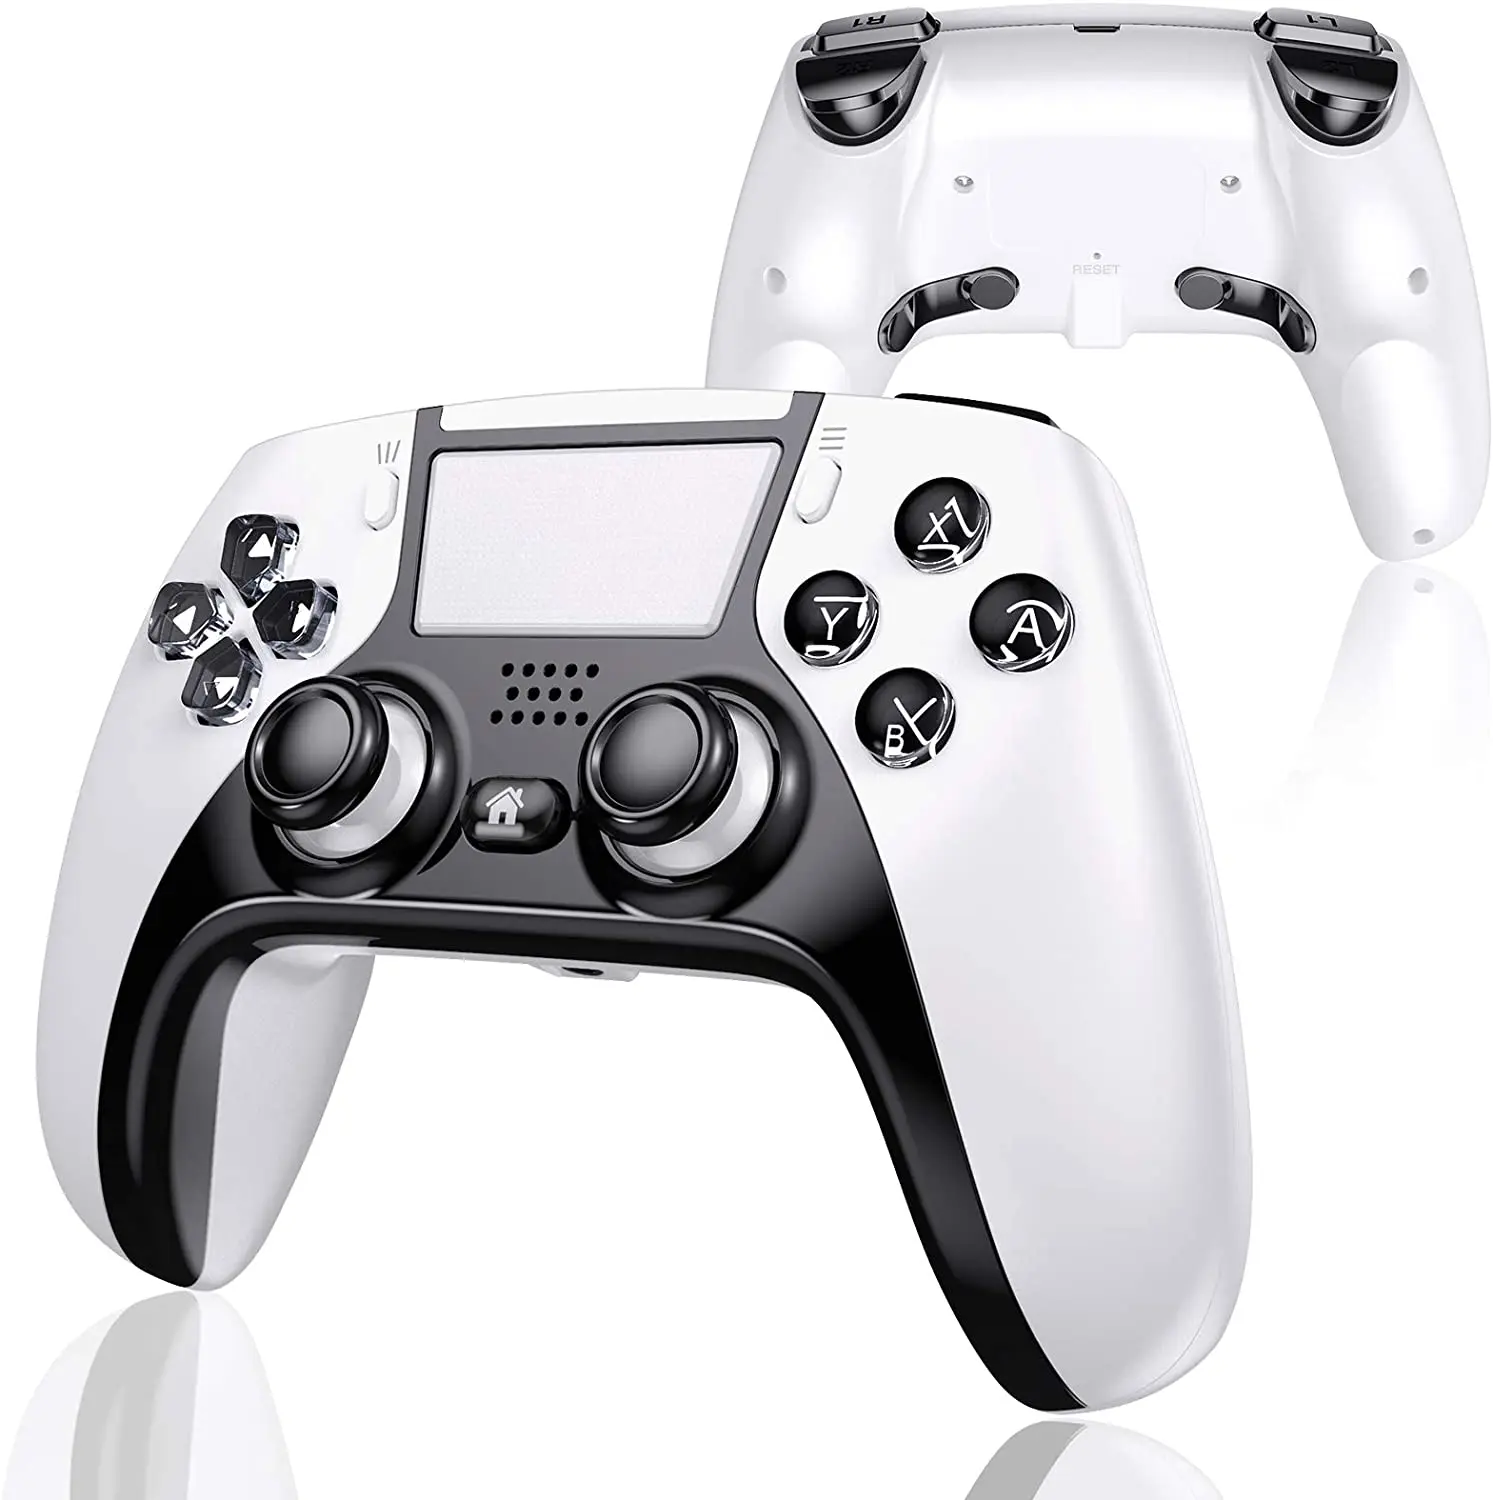 

New Style with PS5 Wireless Game Controller For PS4 Gamepad with joystick, Black white